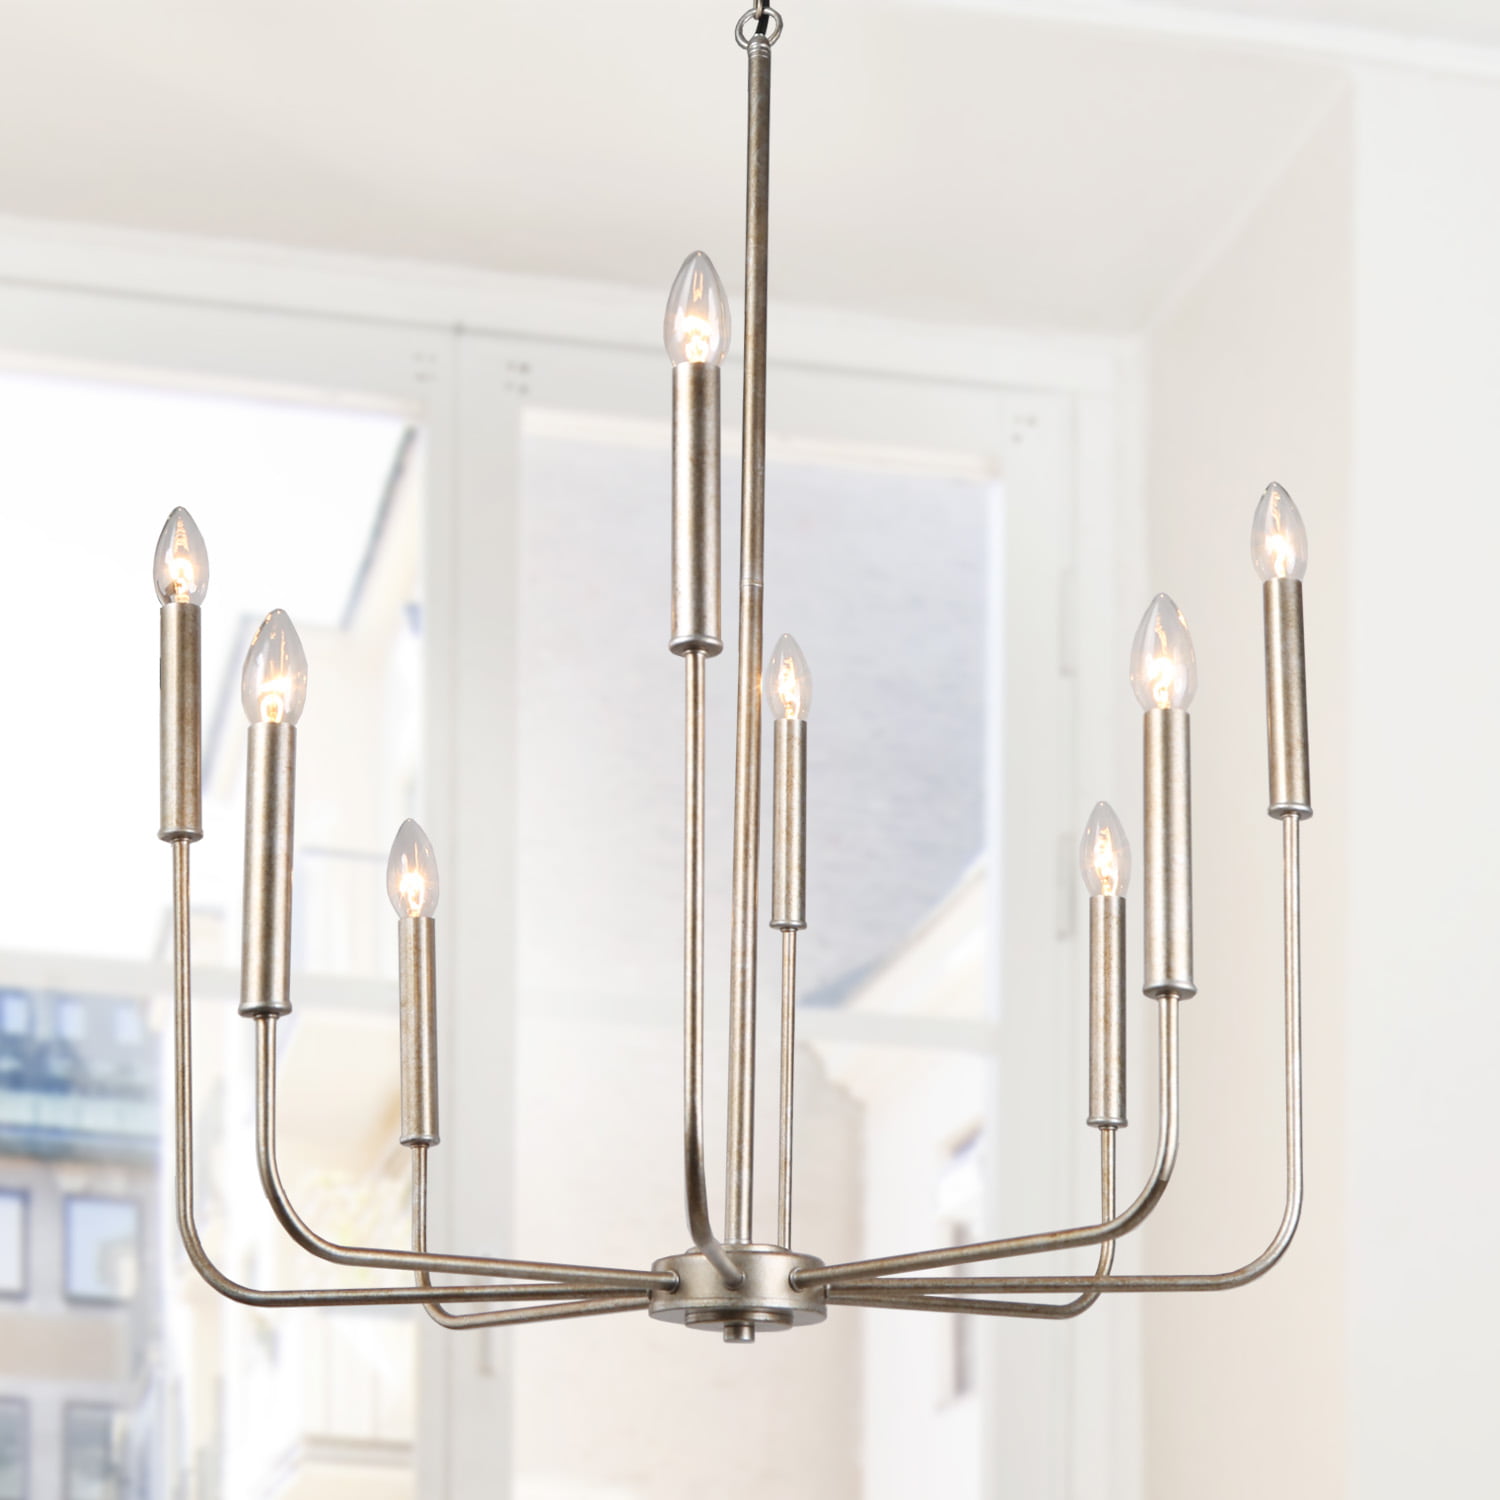 Champagne Gold Kitchen Light Fixtures - The Prettiest ...